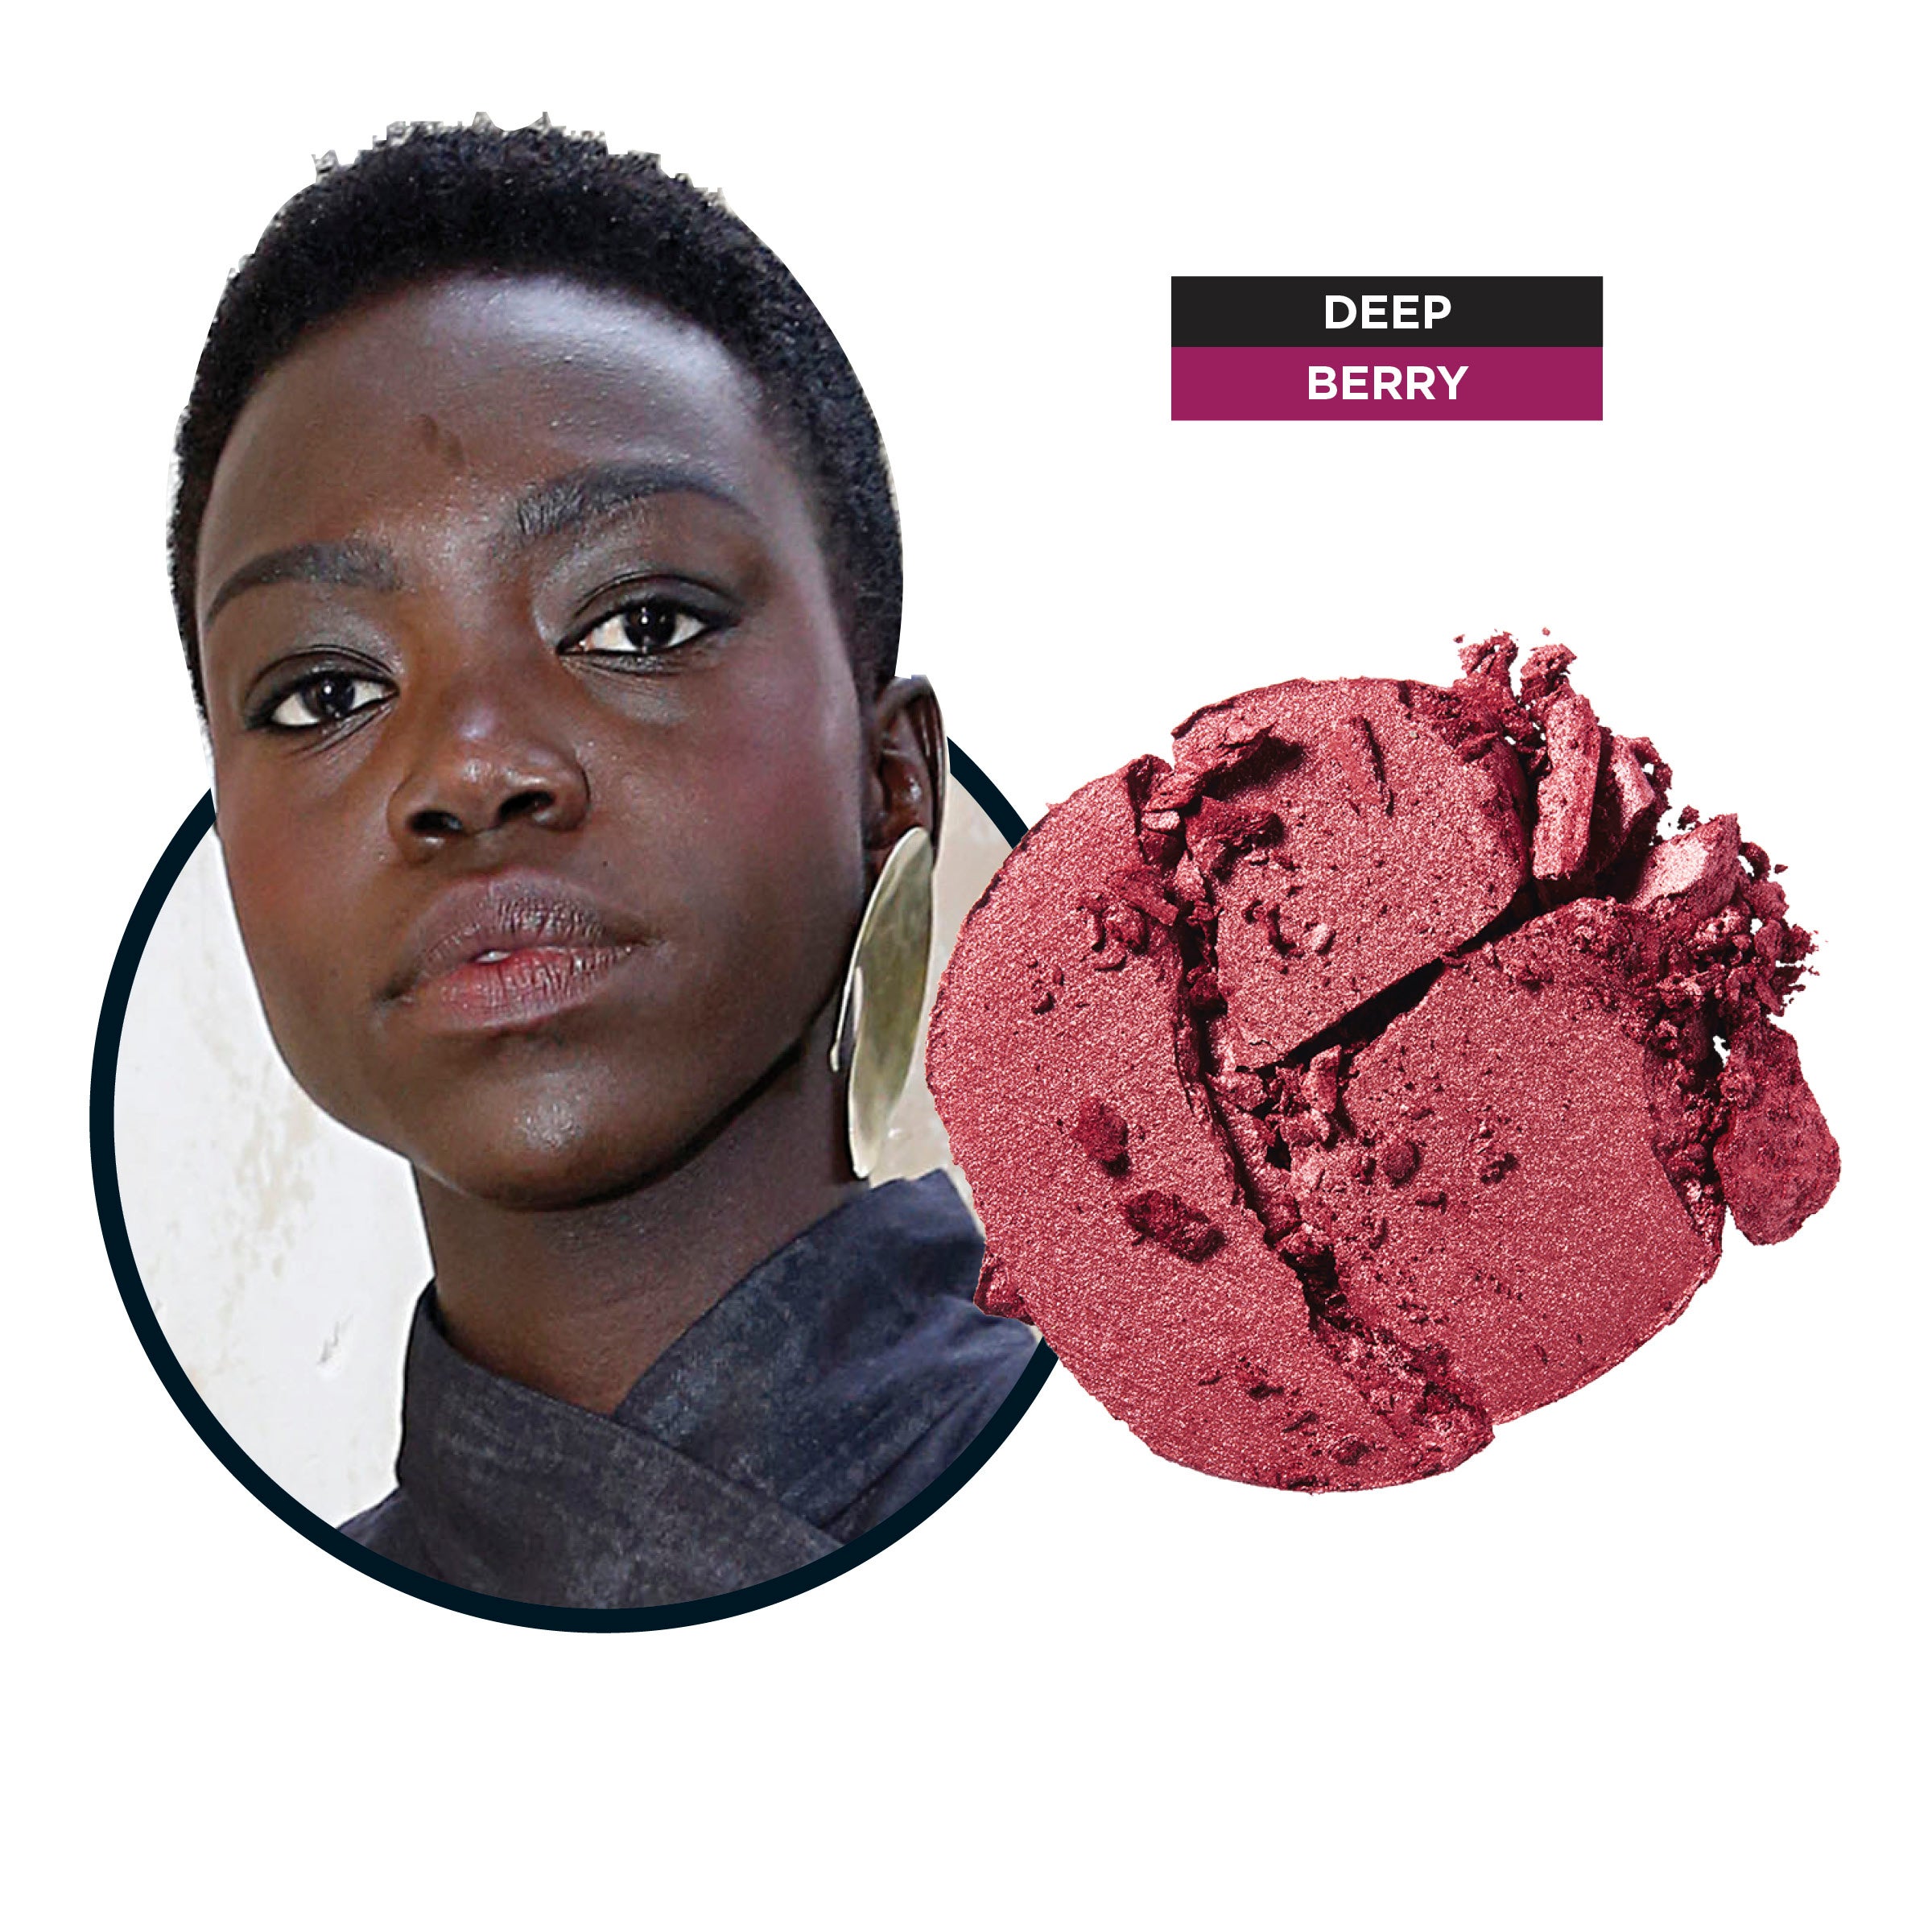 Get Cheeky: The Best Blushes For Every Shade Of Brown